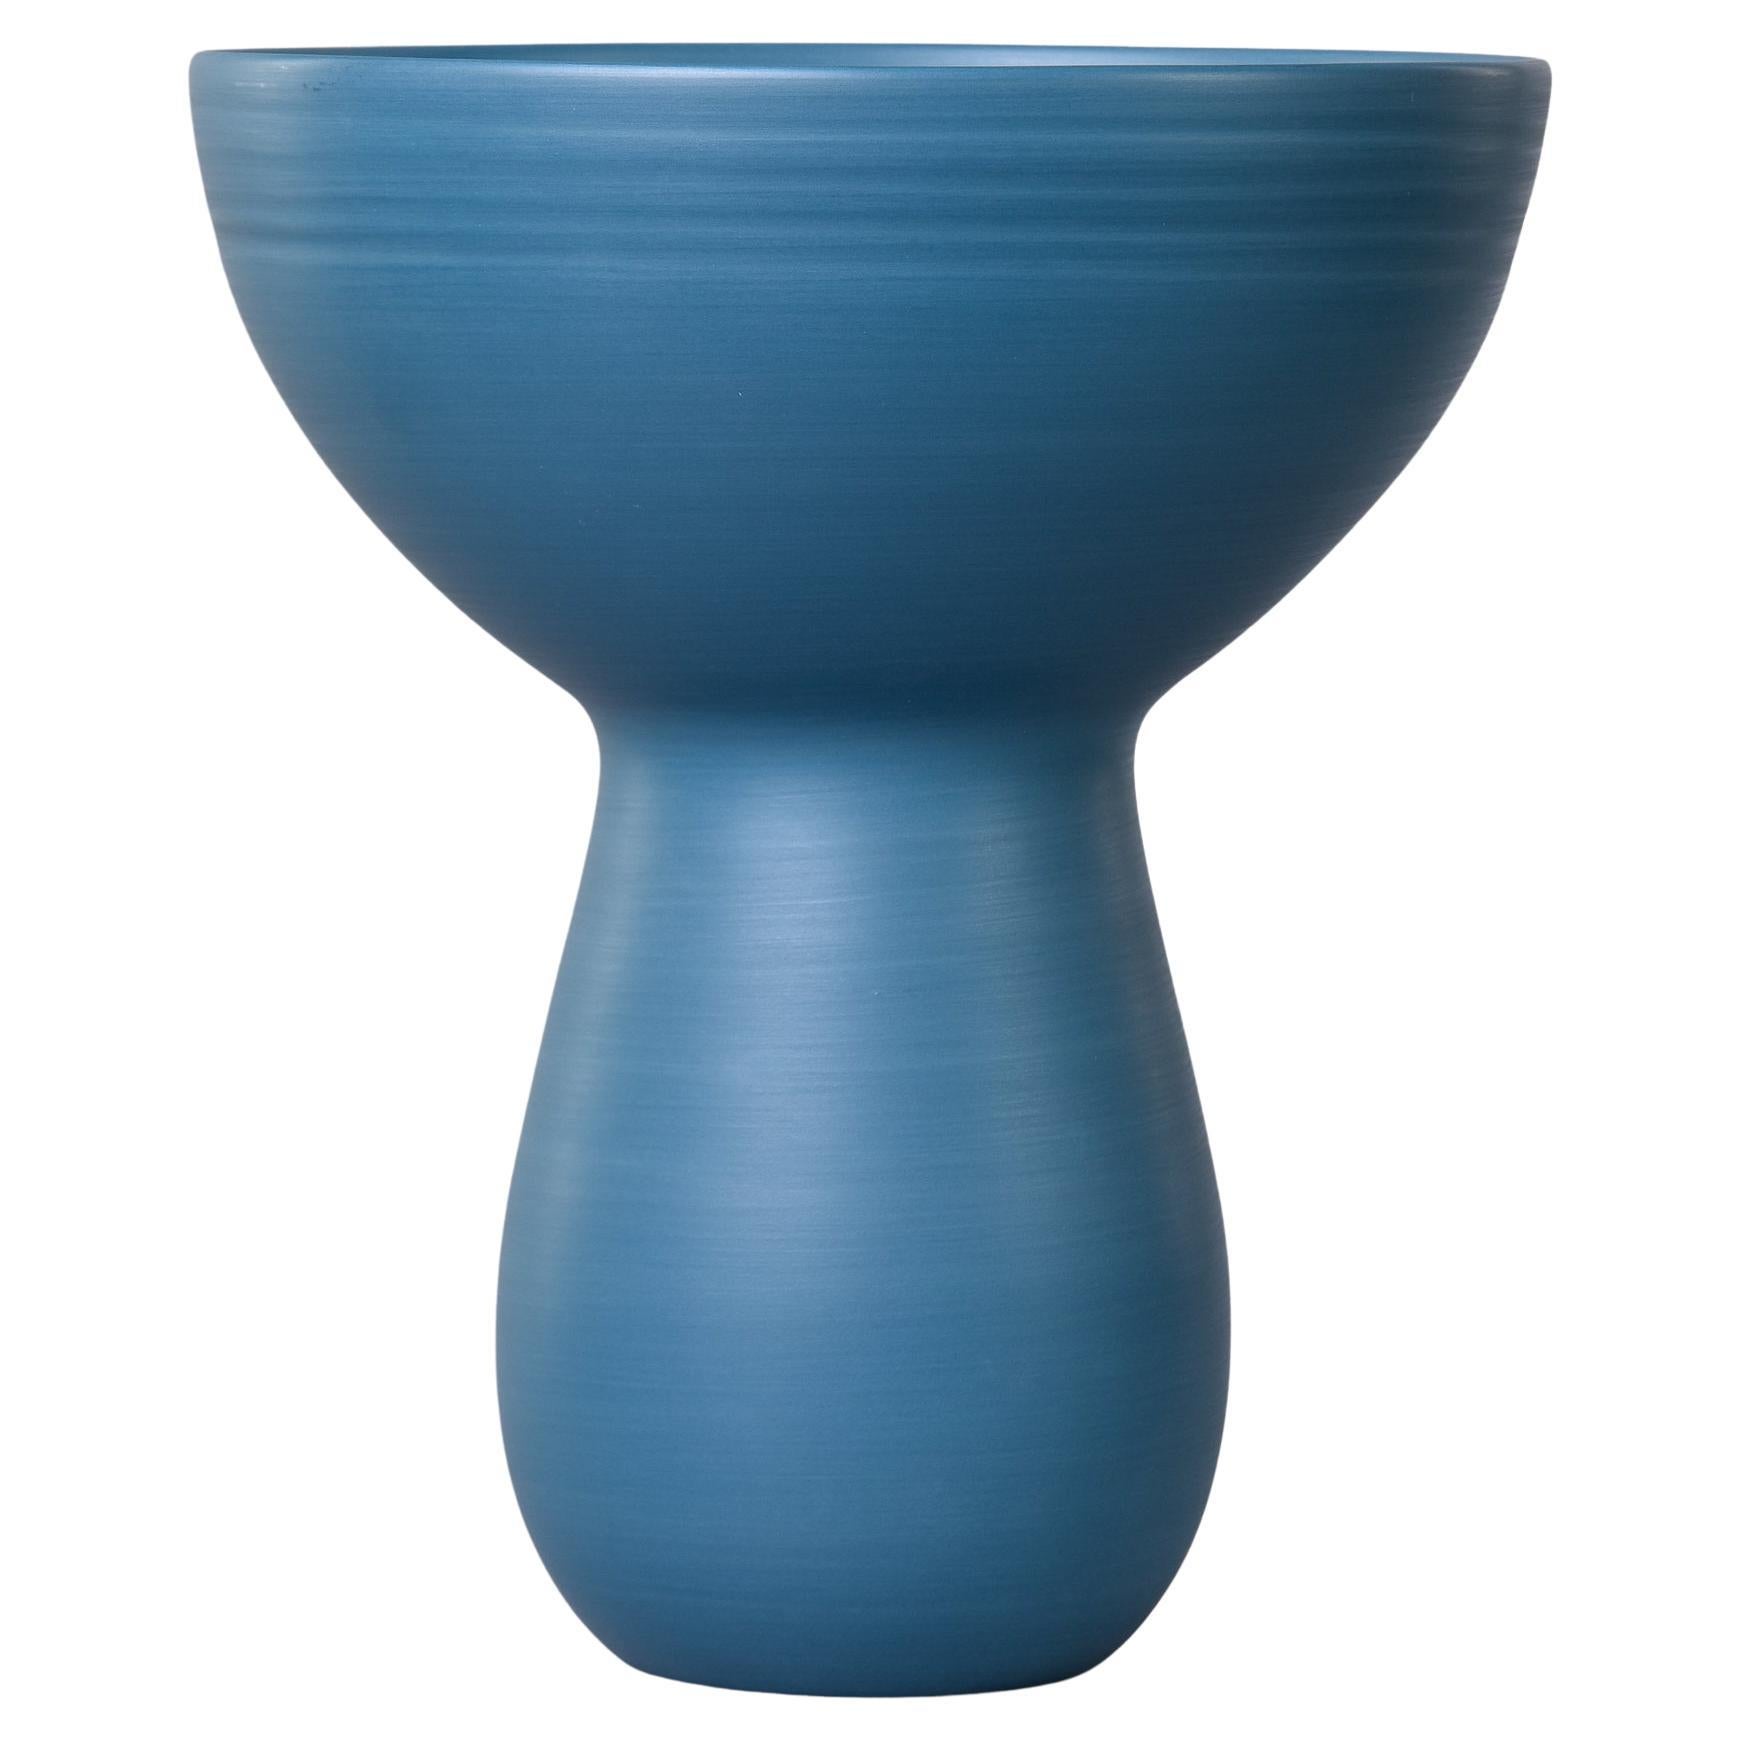 Rina Menardi Small Bouquet Vase in Teal Blue For Sale